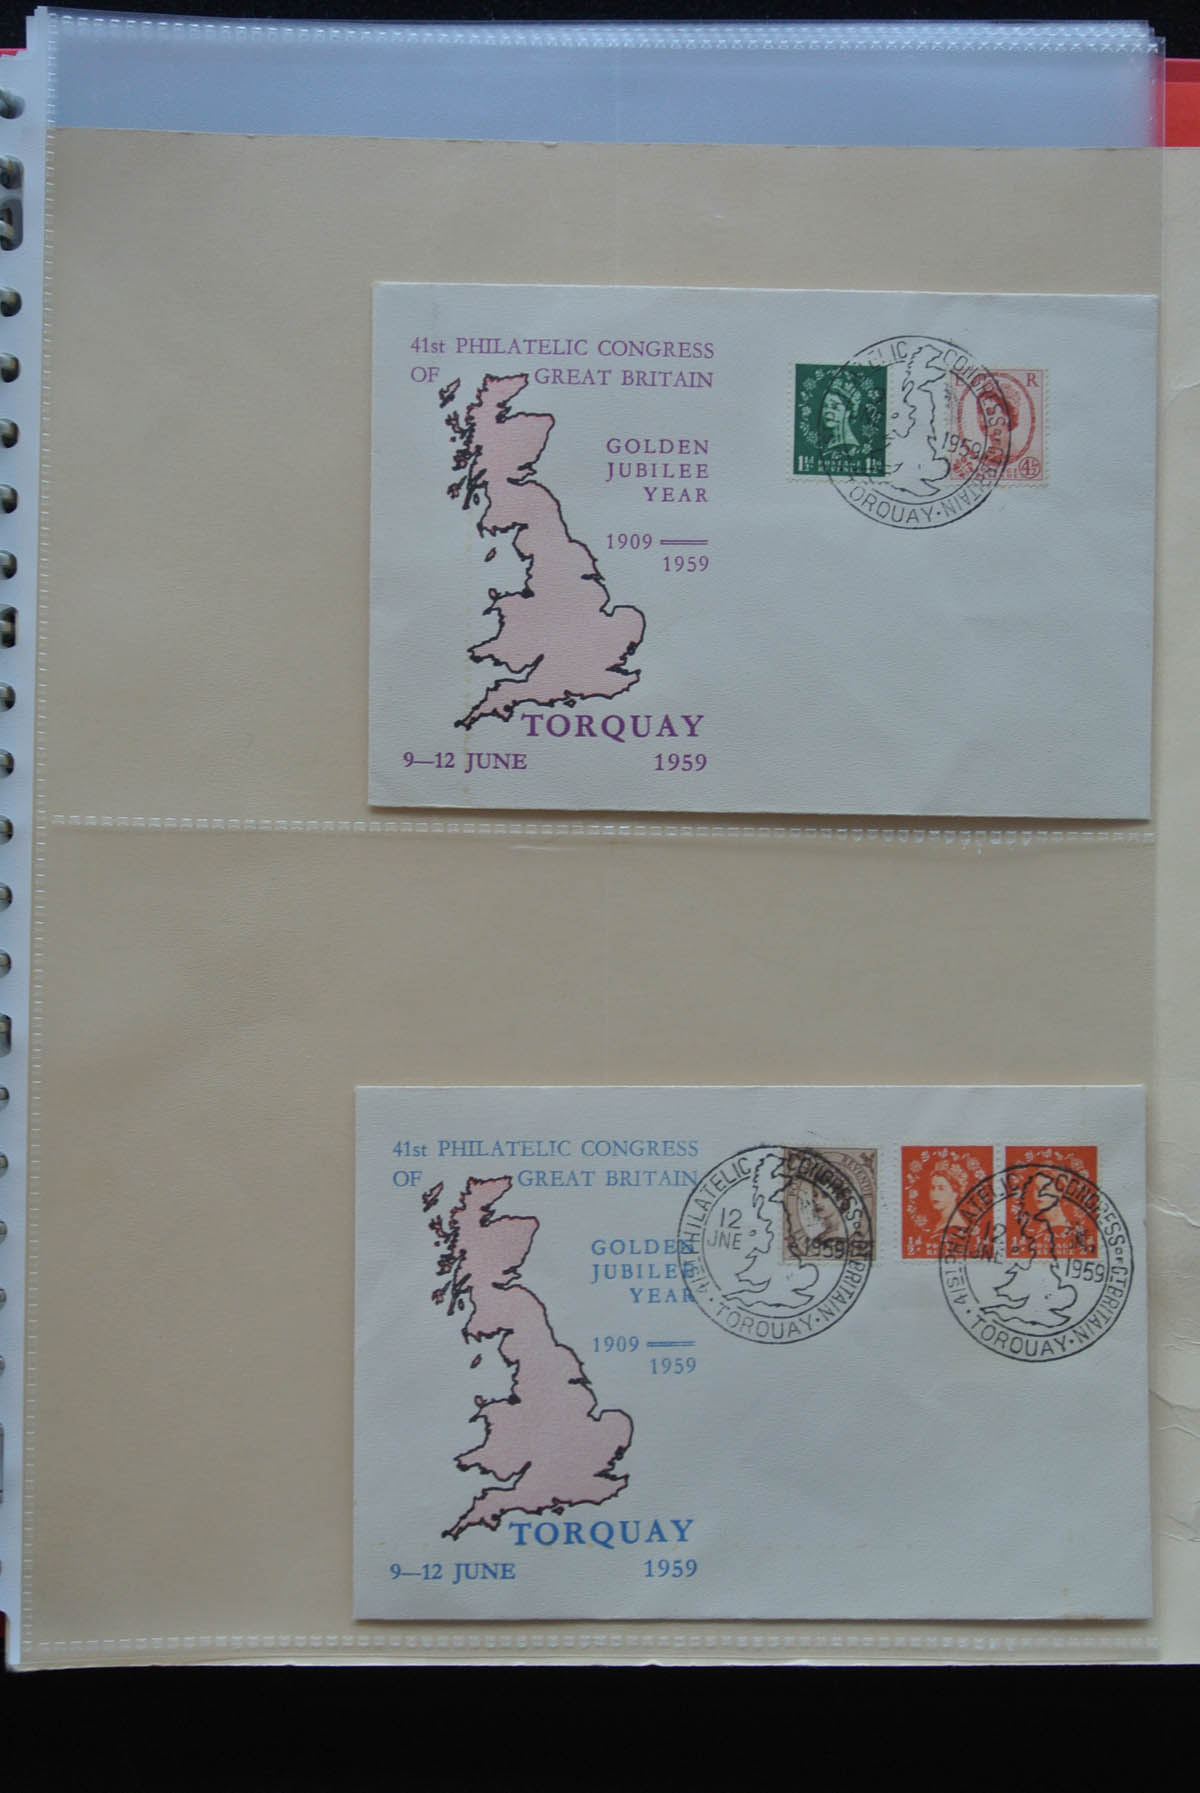 25884 057 - 25884 Europa covers '50s.